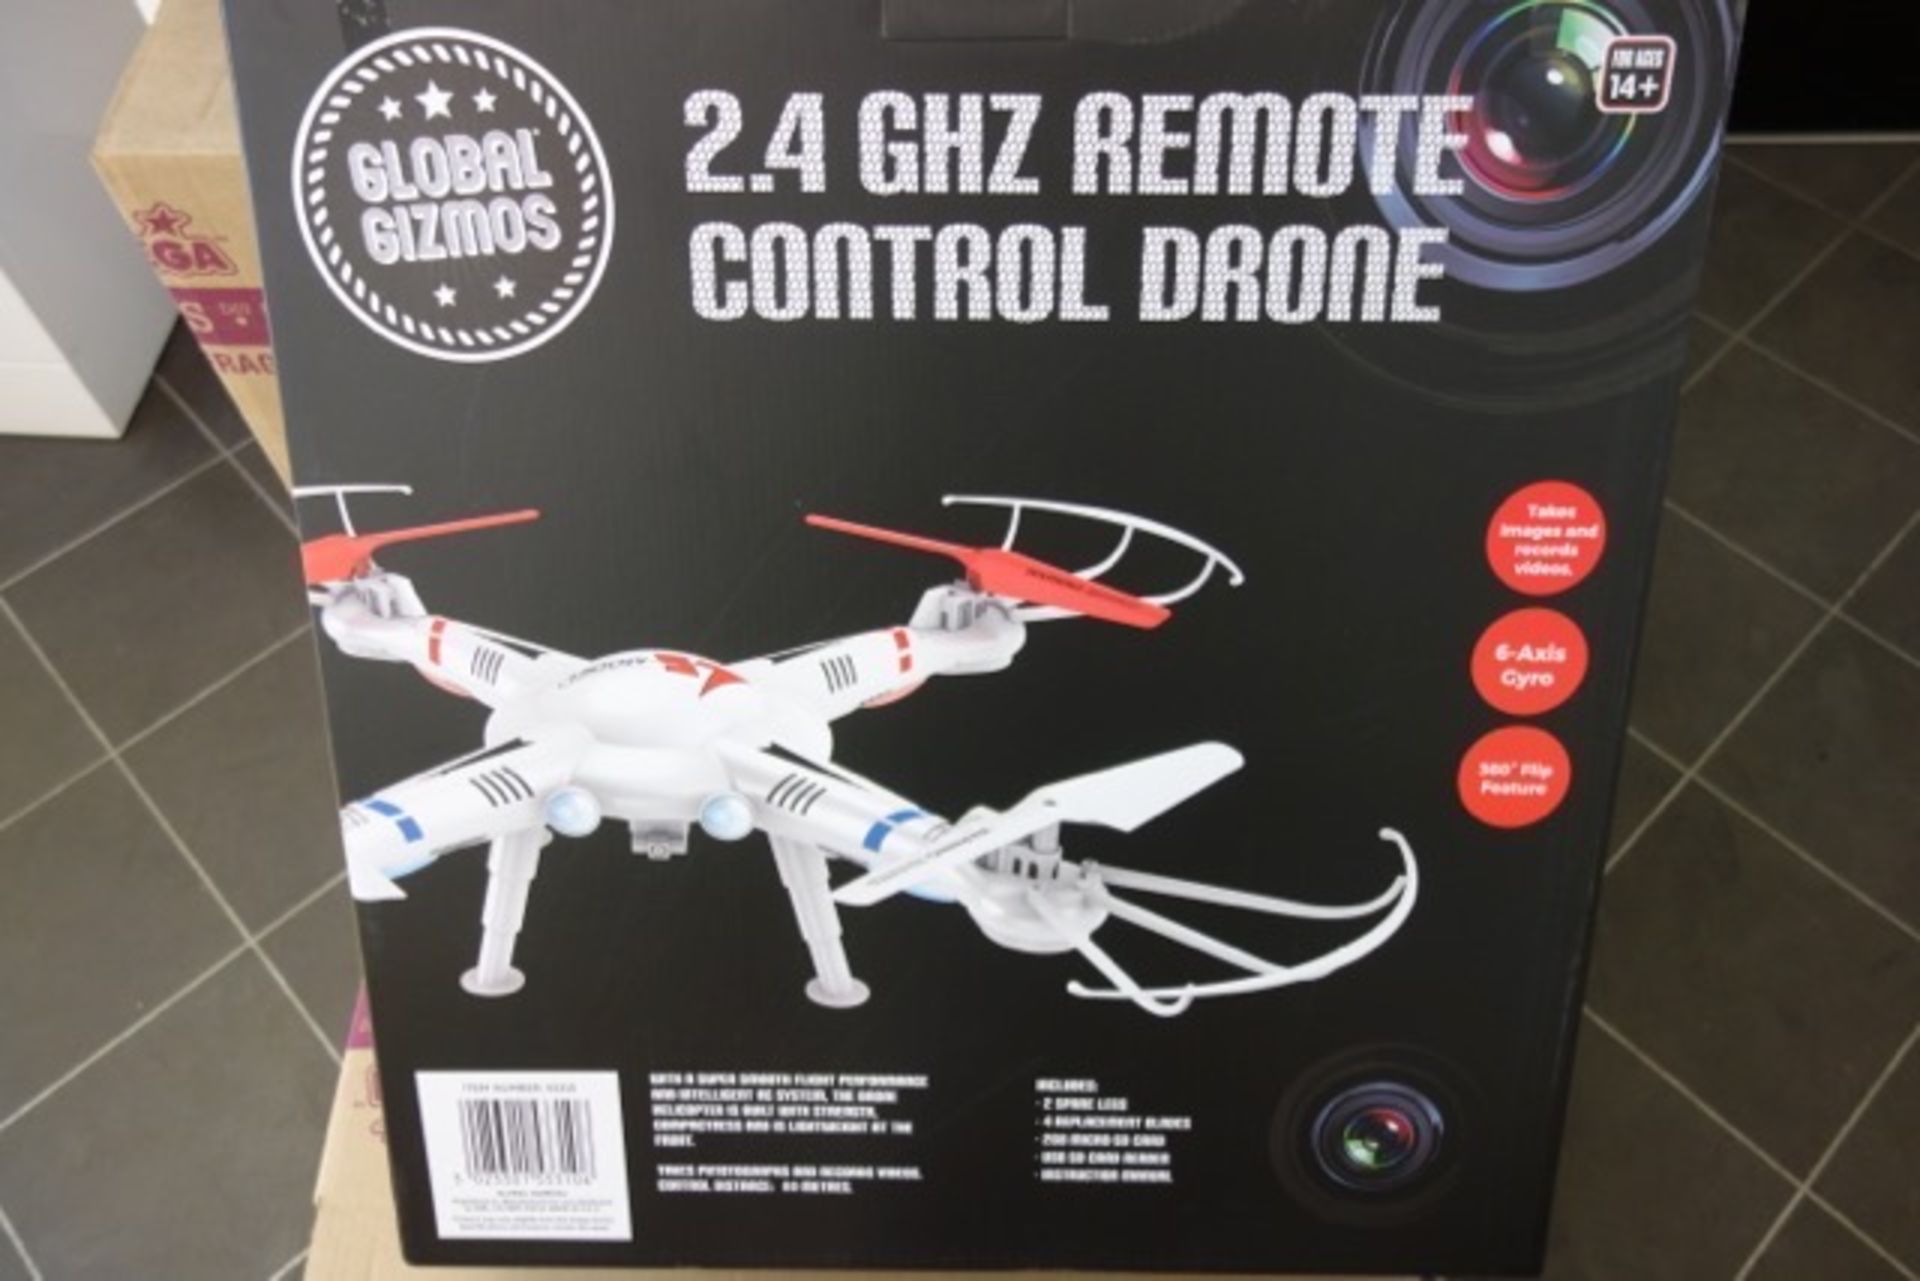 4 x Brand New Global Gizmos 2.4GHZ Remote Control Drone. Takes images & recordes videos, 6 axis - Image 3 of 4